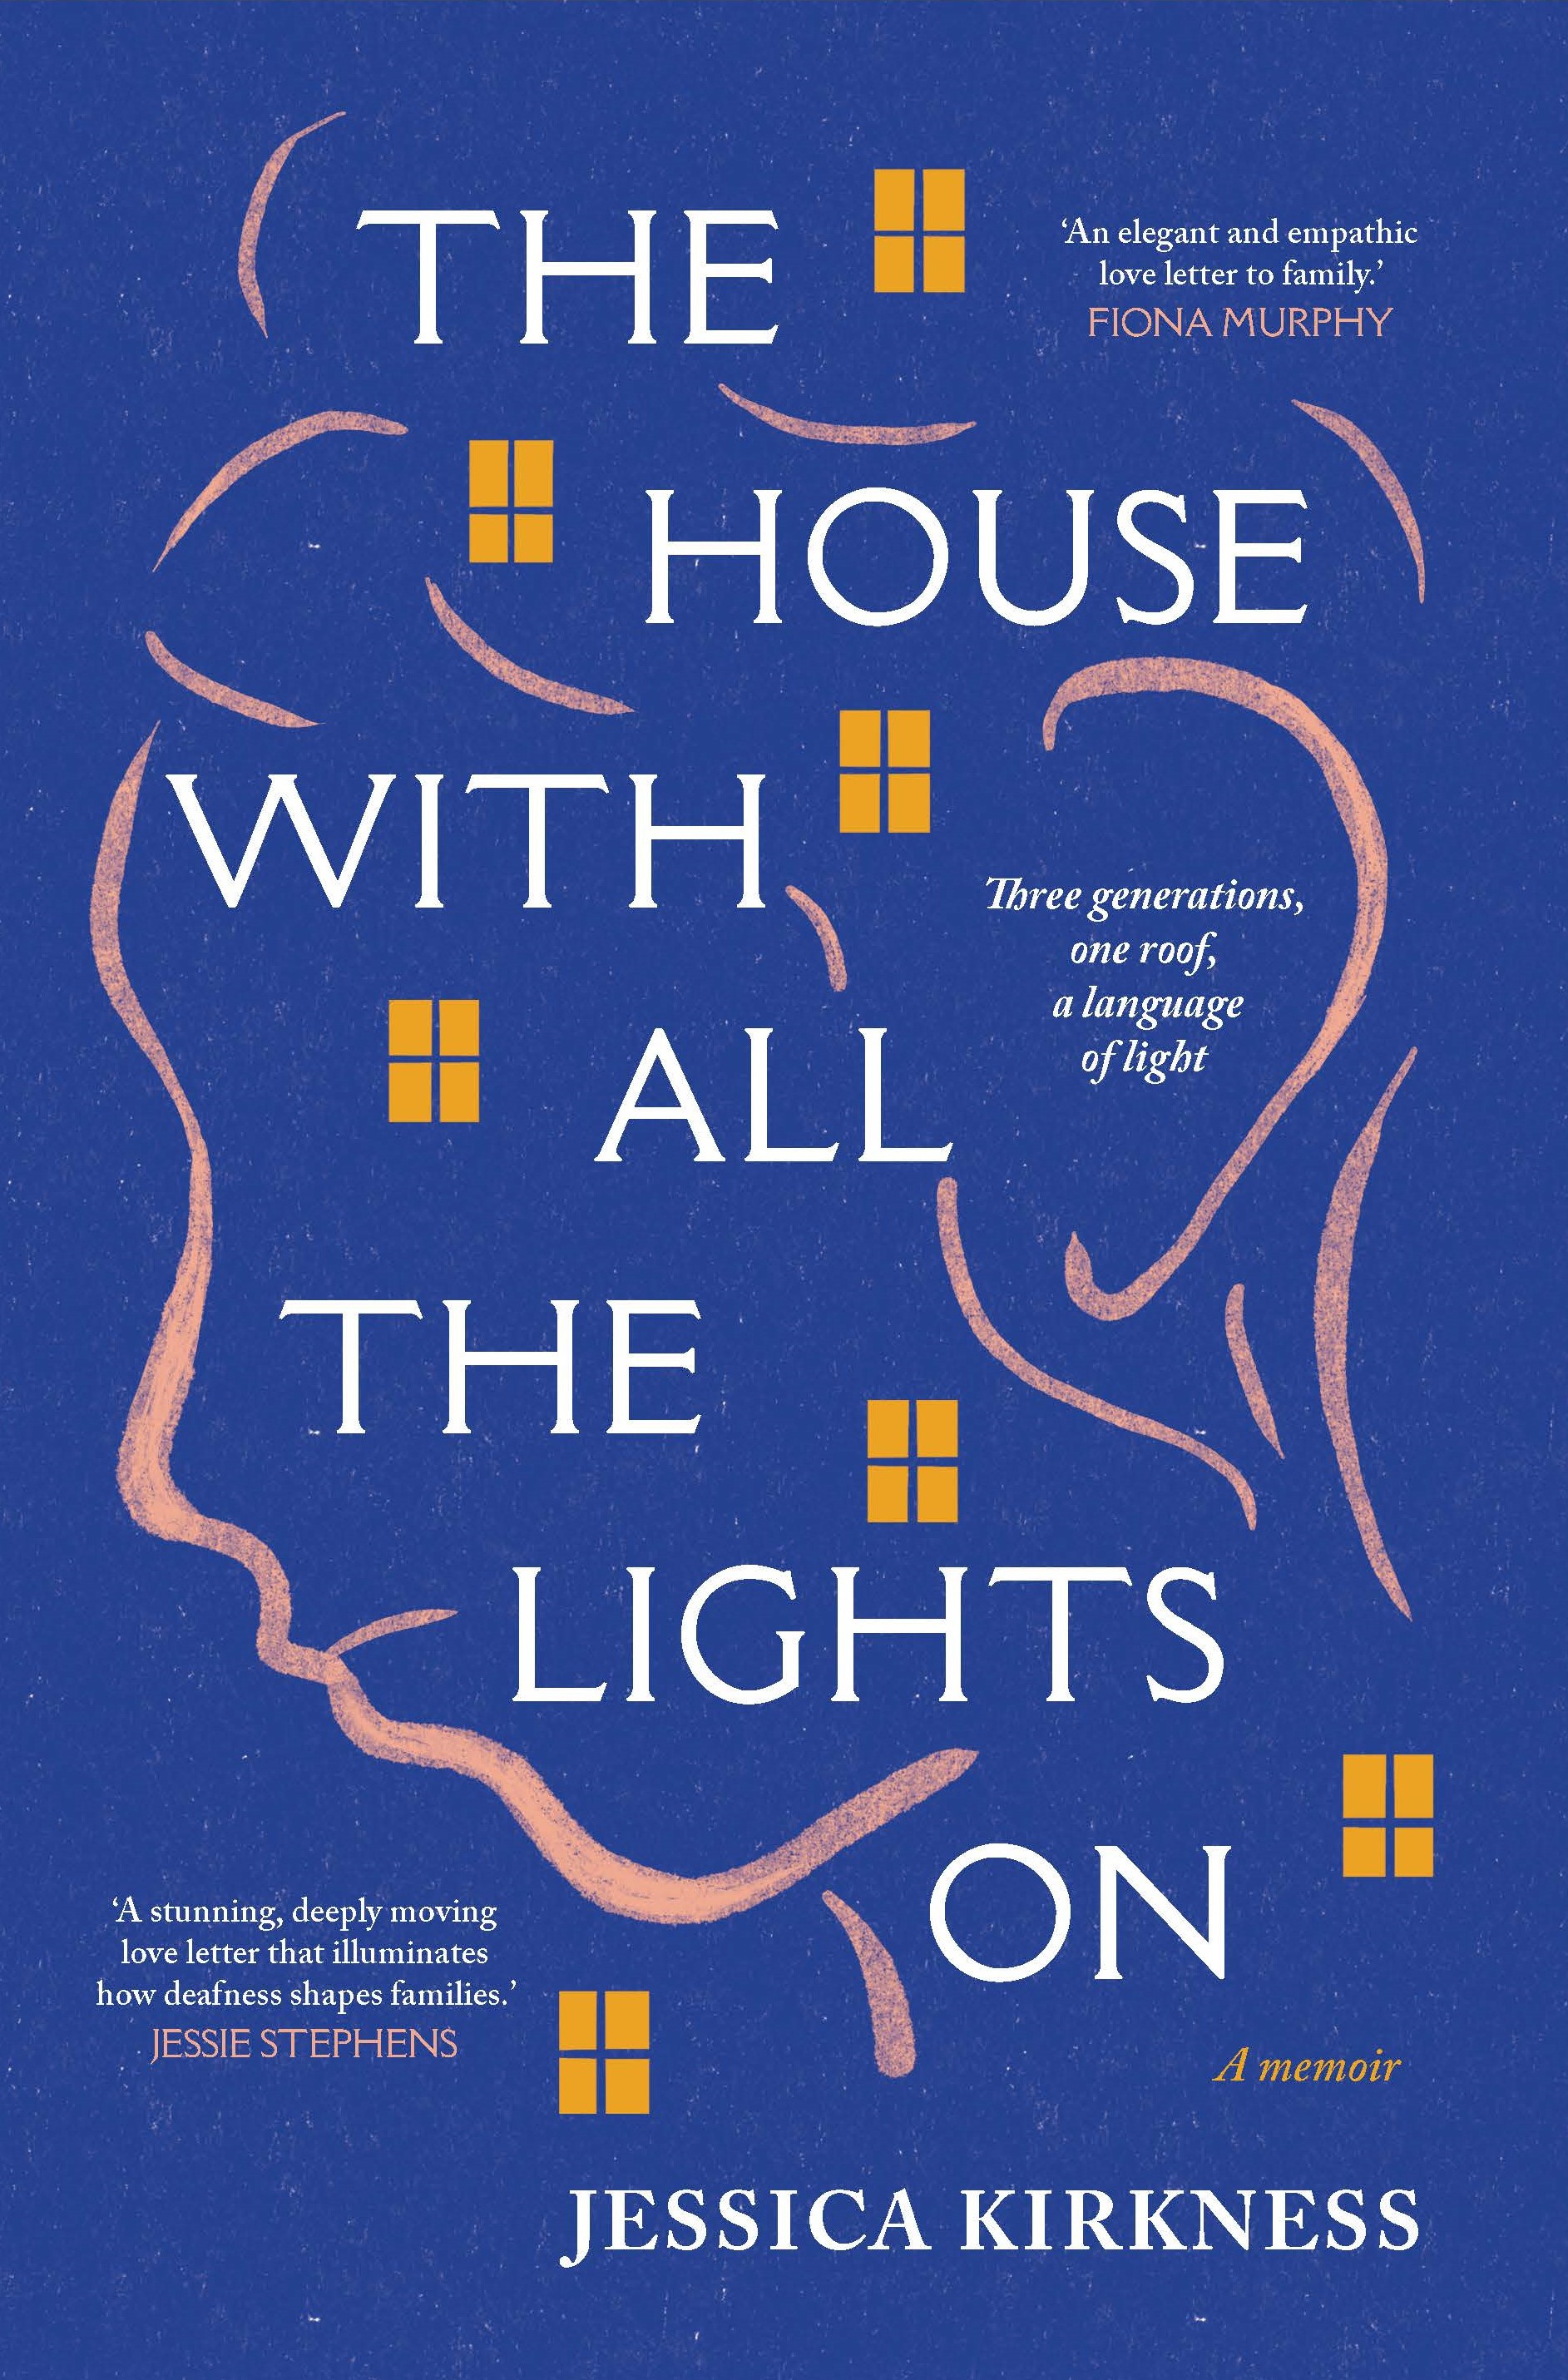 The House With All The Lights On by Jessica Kirkness